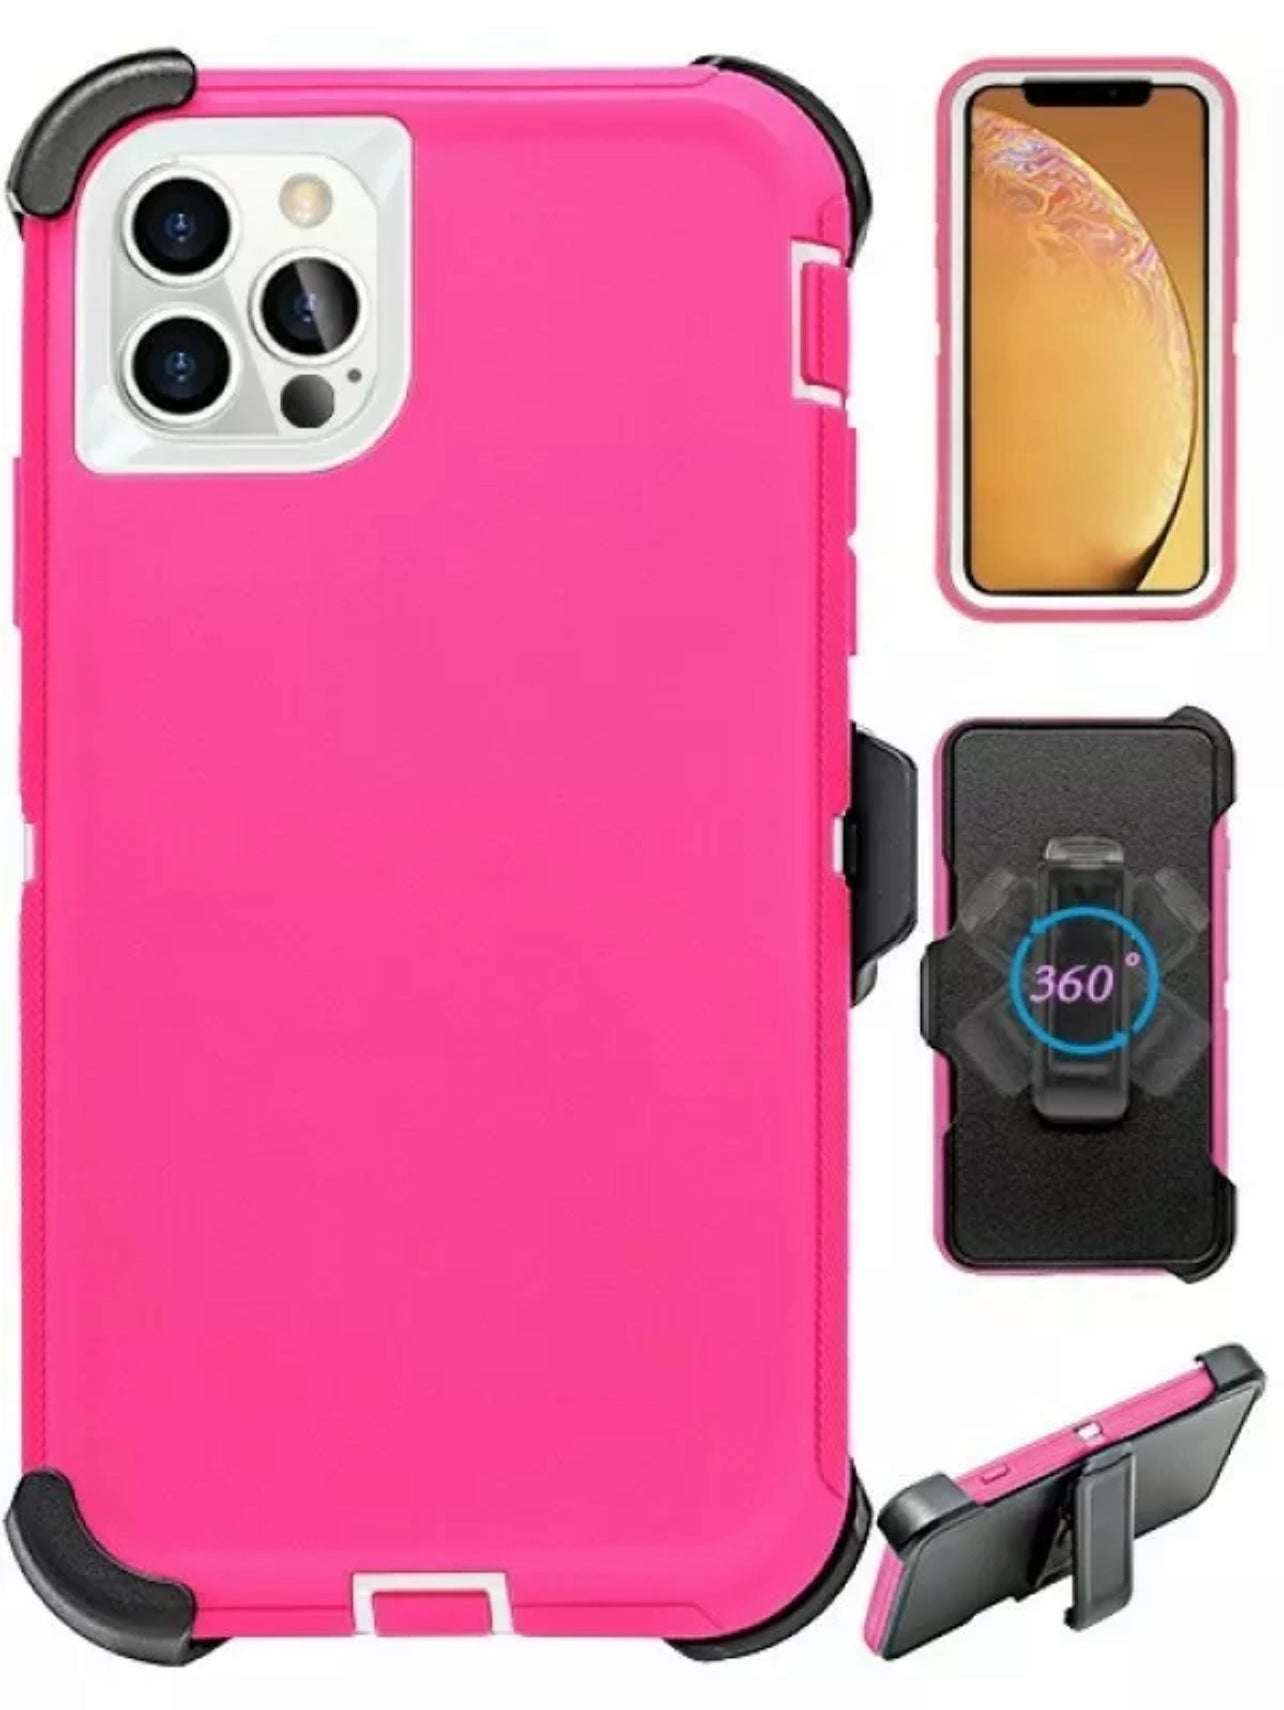 iPhone 11 Heavy Duty Defender Case